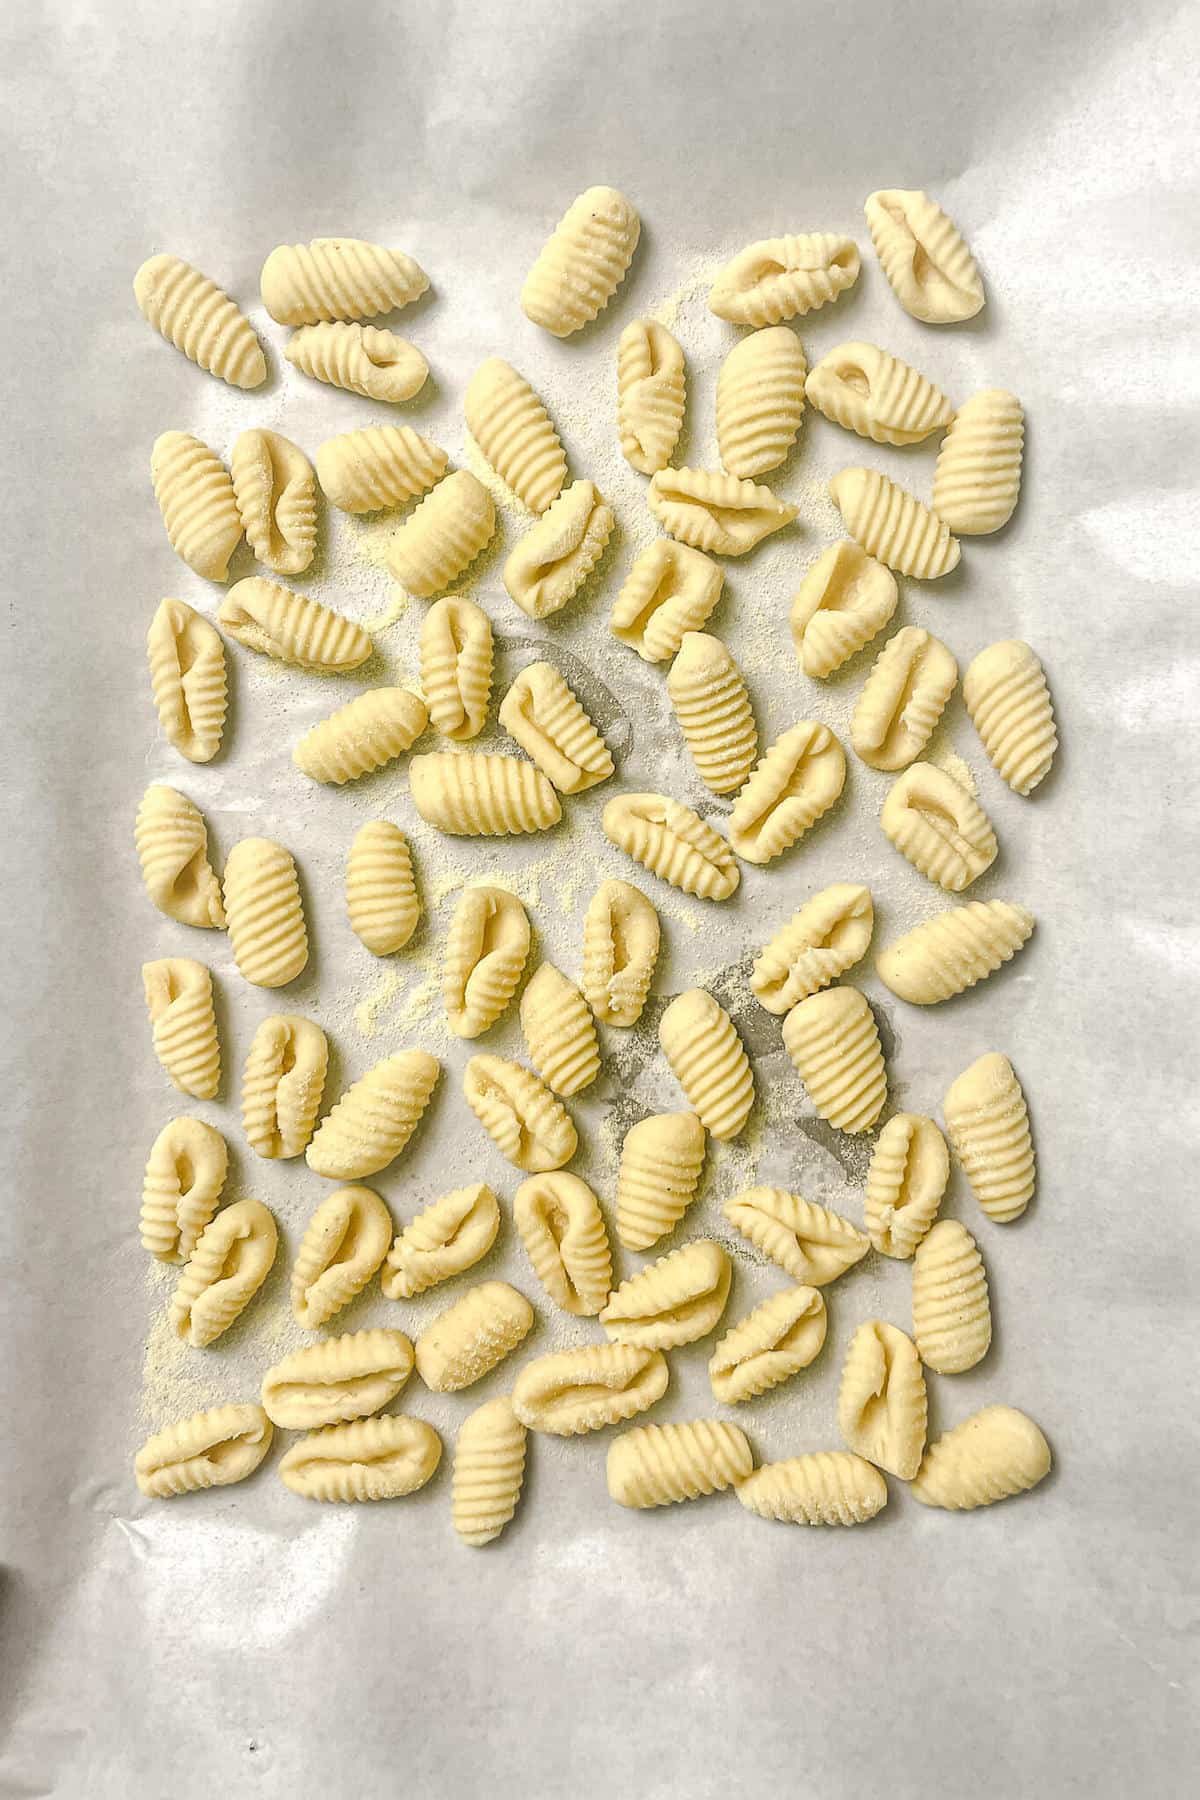 sheet pan filled with cavatelli